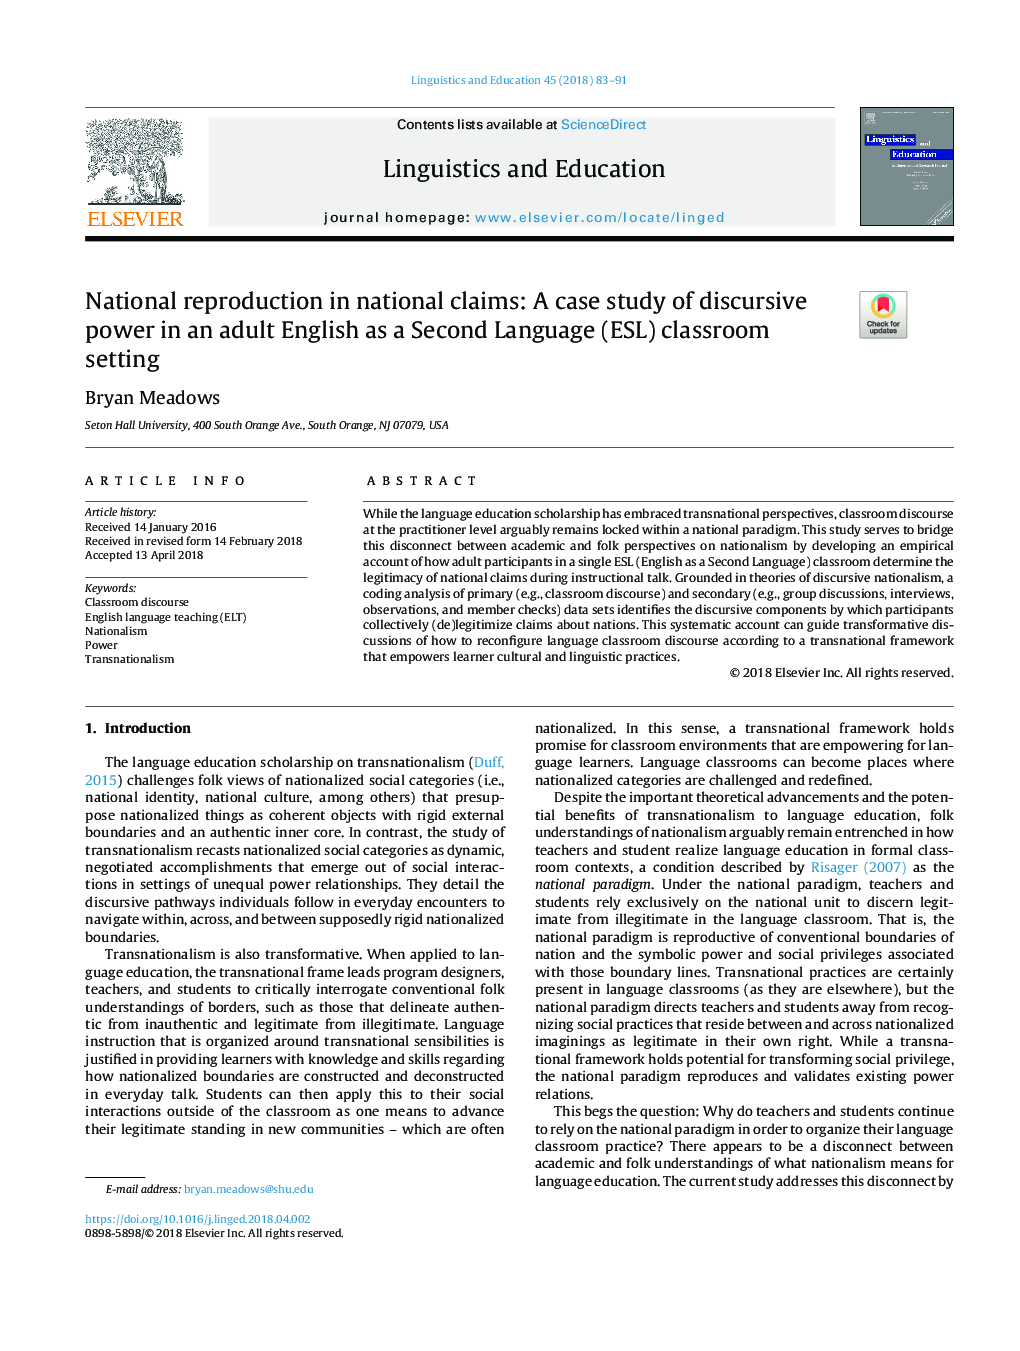 National reproduction in national claims: A case study of discursive power in an adult English as a Second Language (ESL) classroom setting